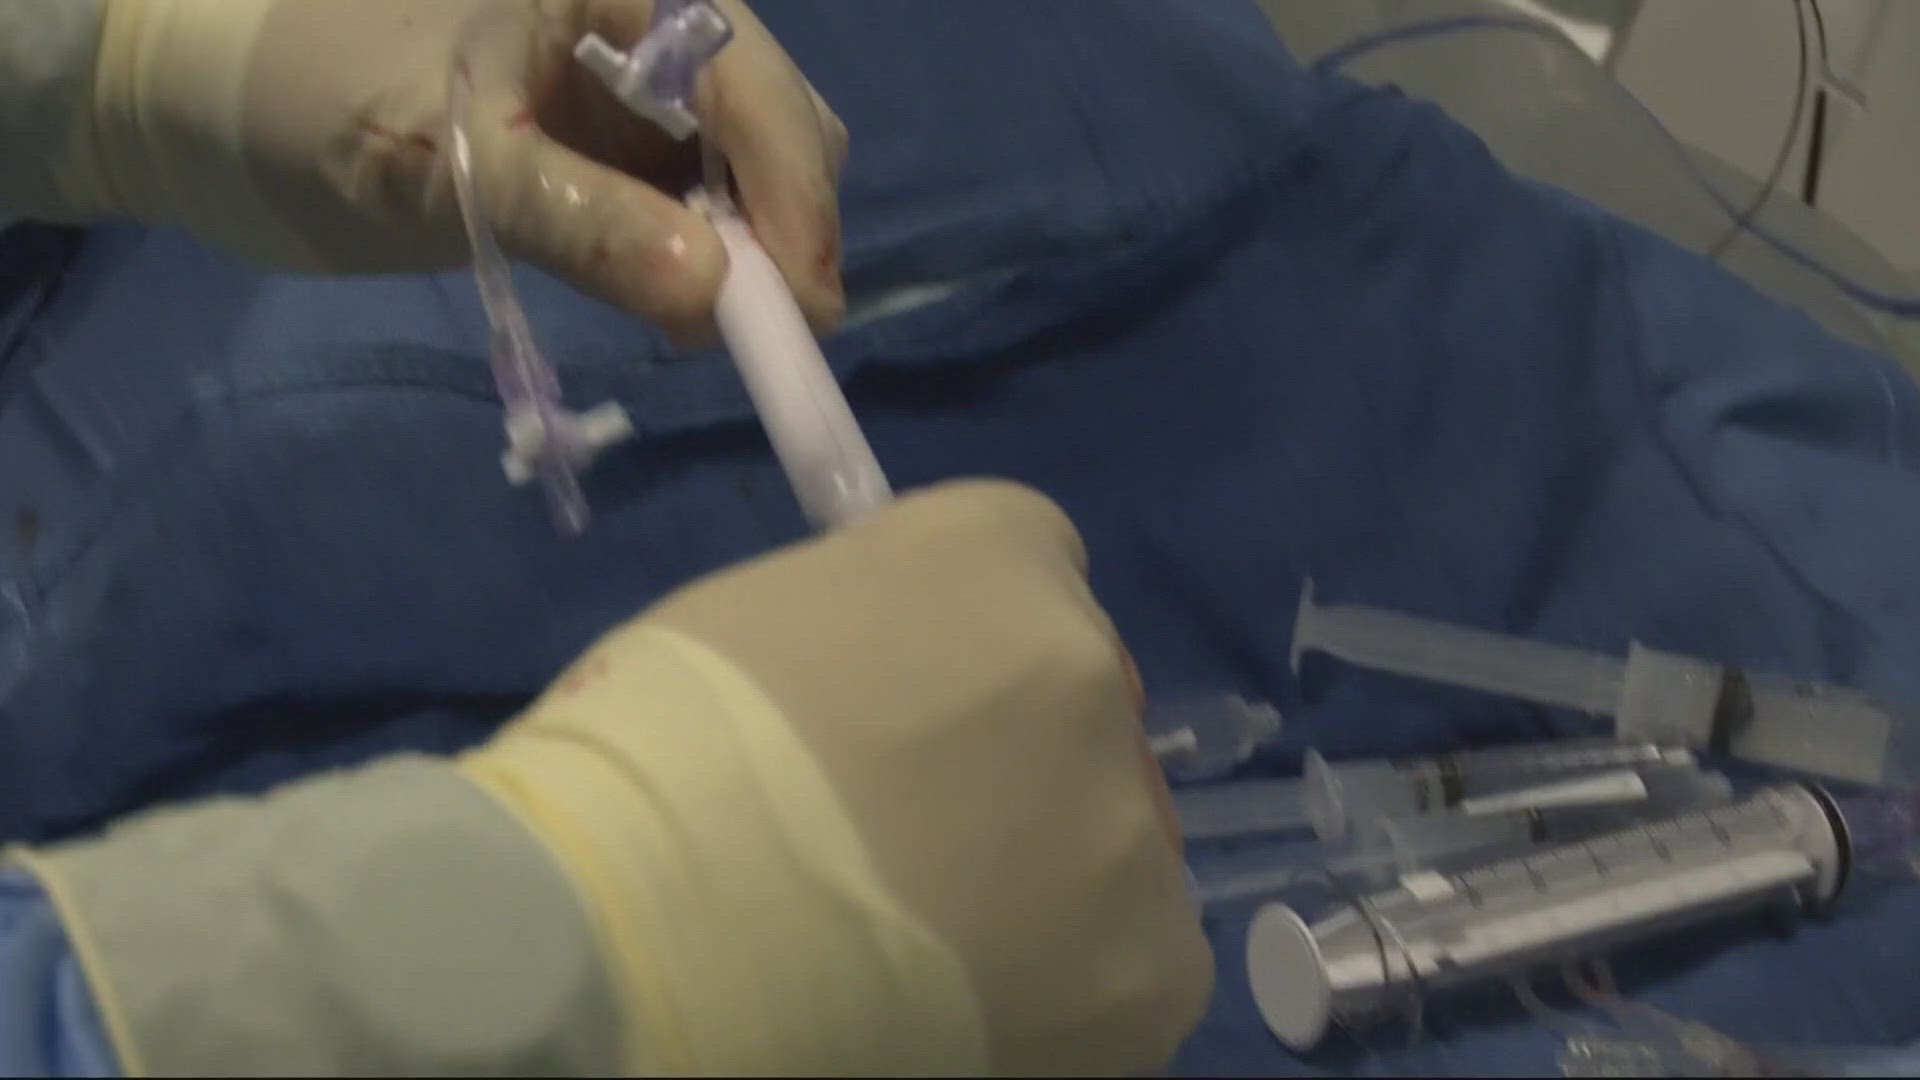 First Coast News was granted exclusive access of a blood clot removal procedure while the patient was still awake.